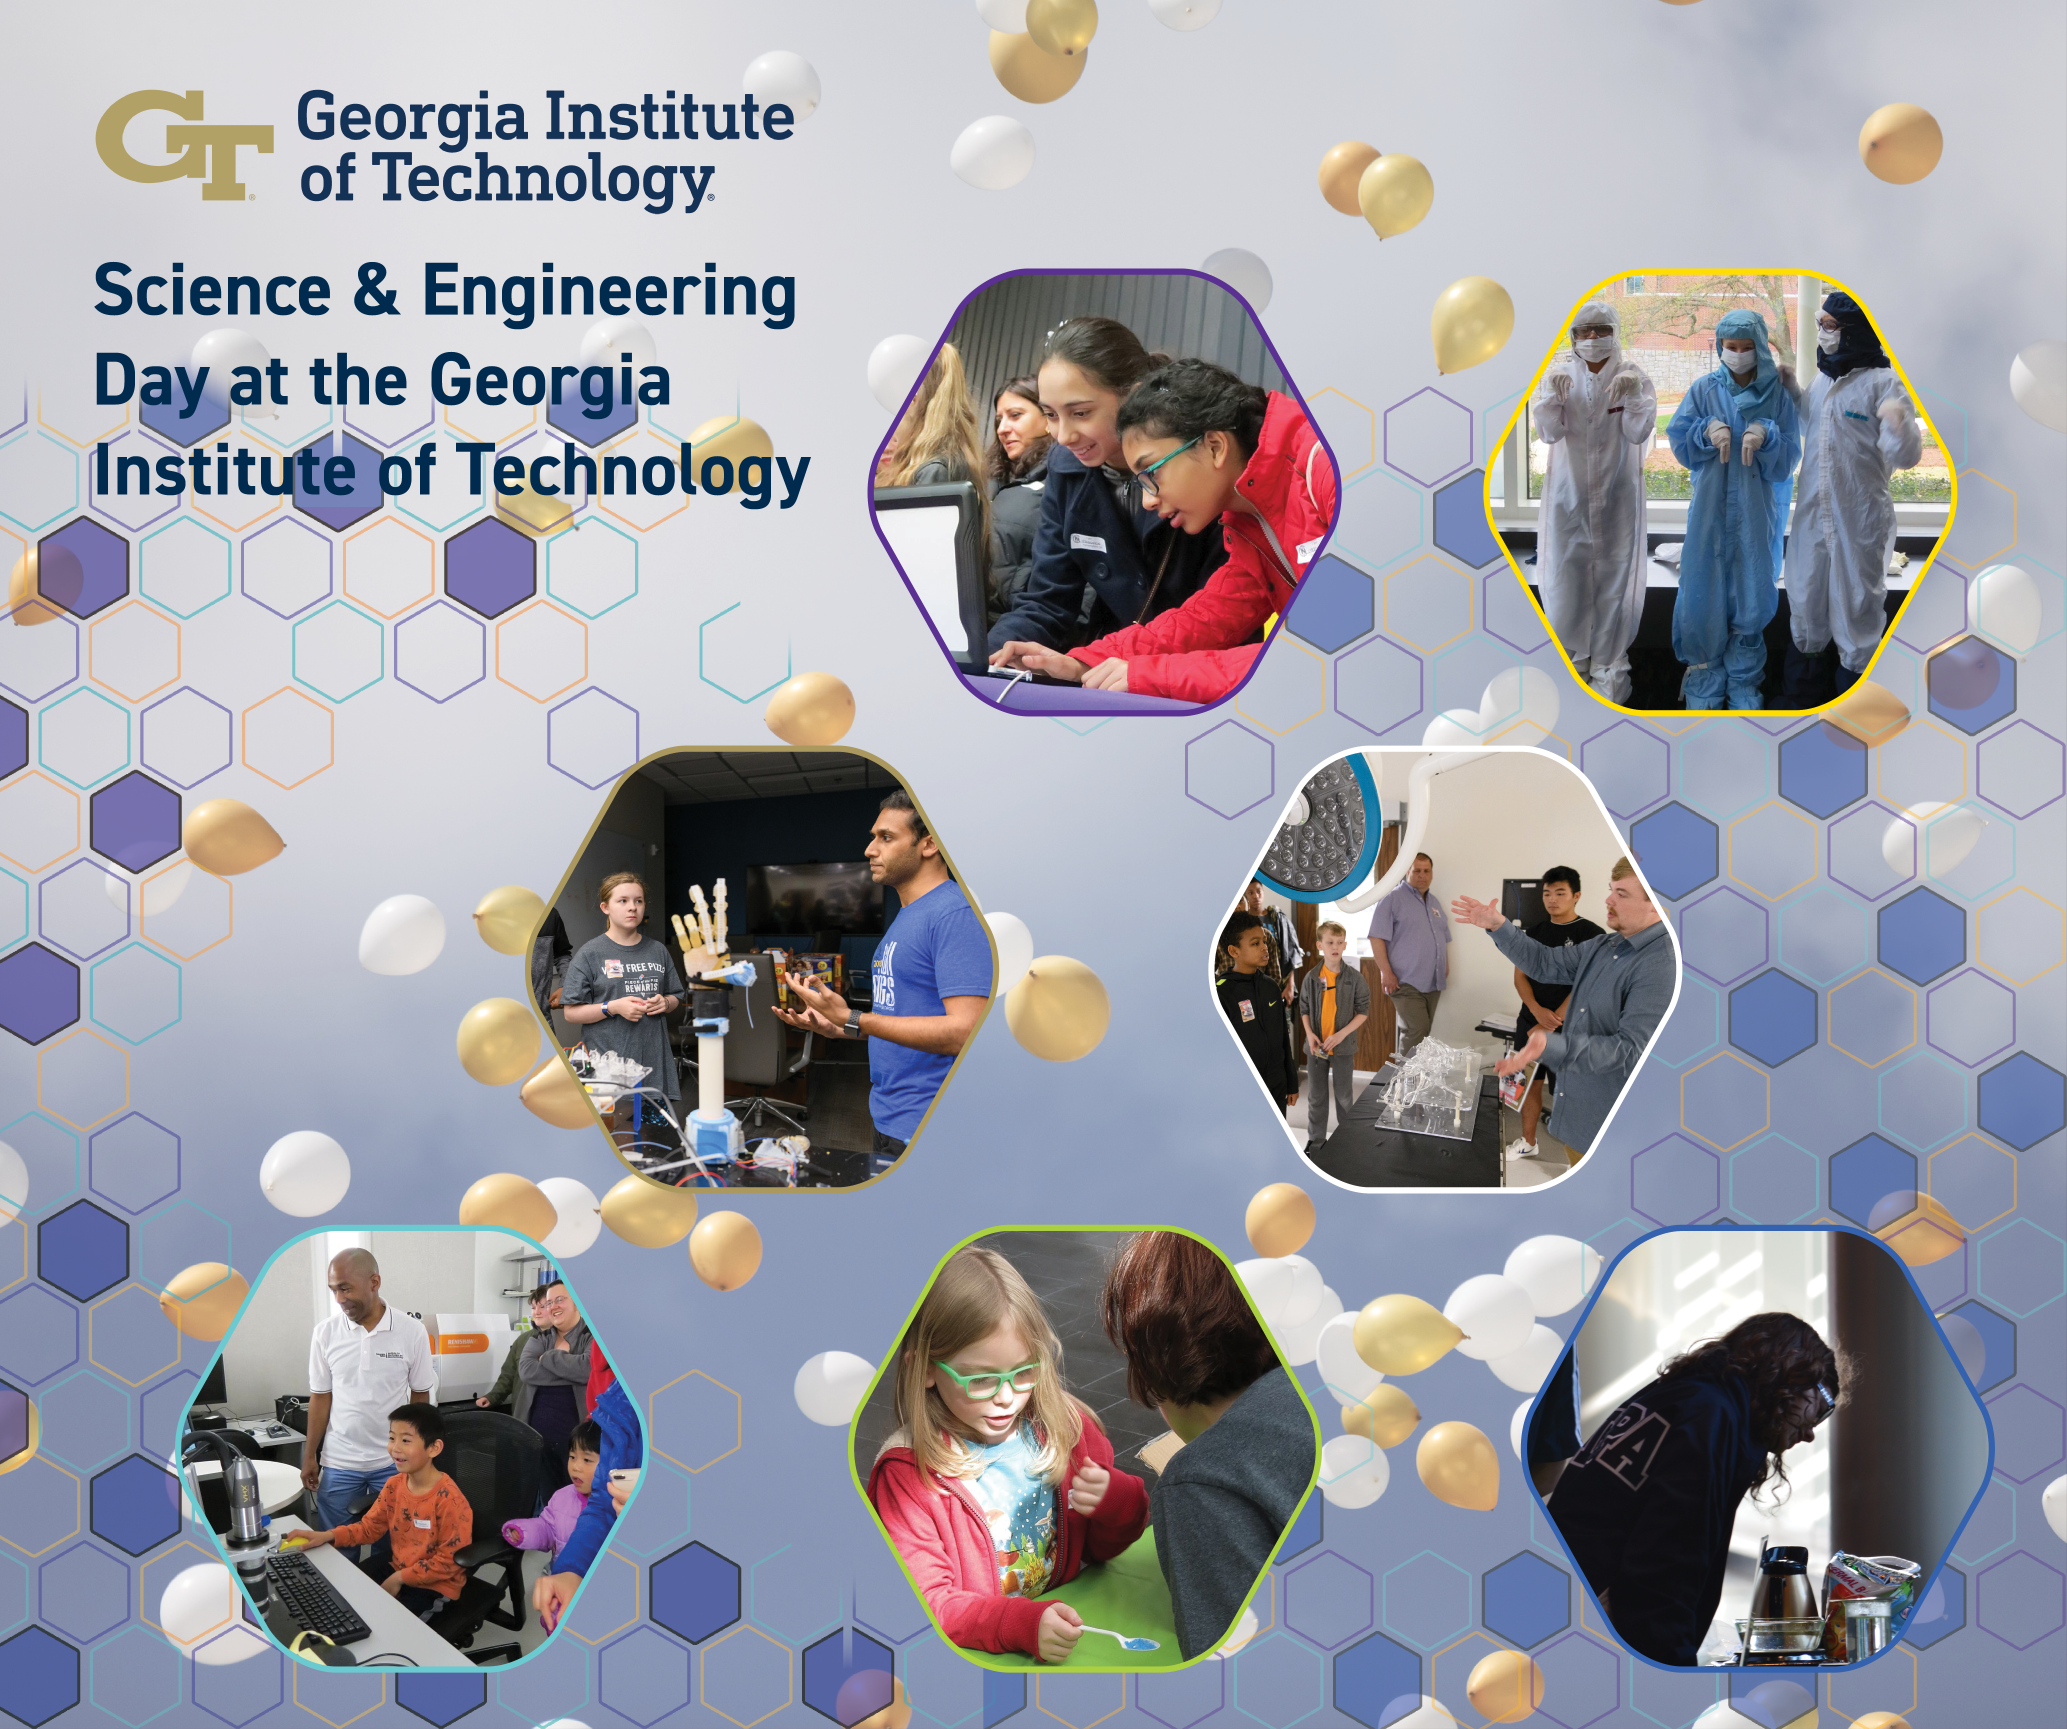 The Atlanta Science Festival &amp; Georgia Tech Present: Science &amp; Engineering Day at GT